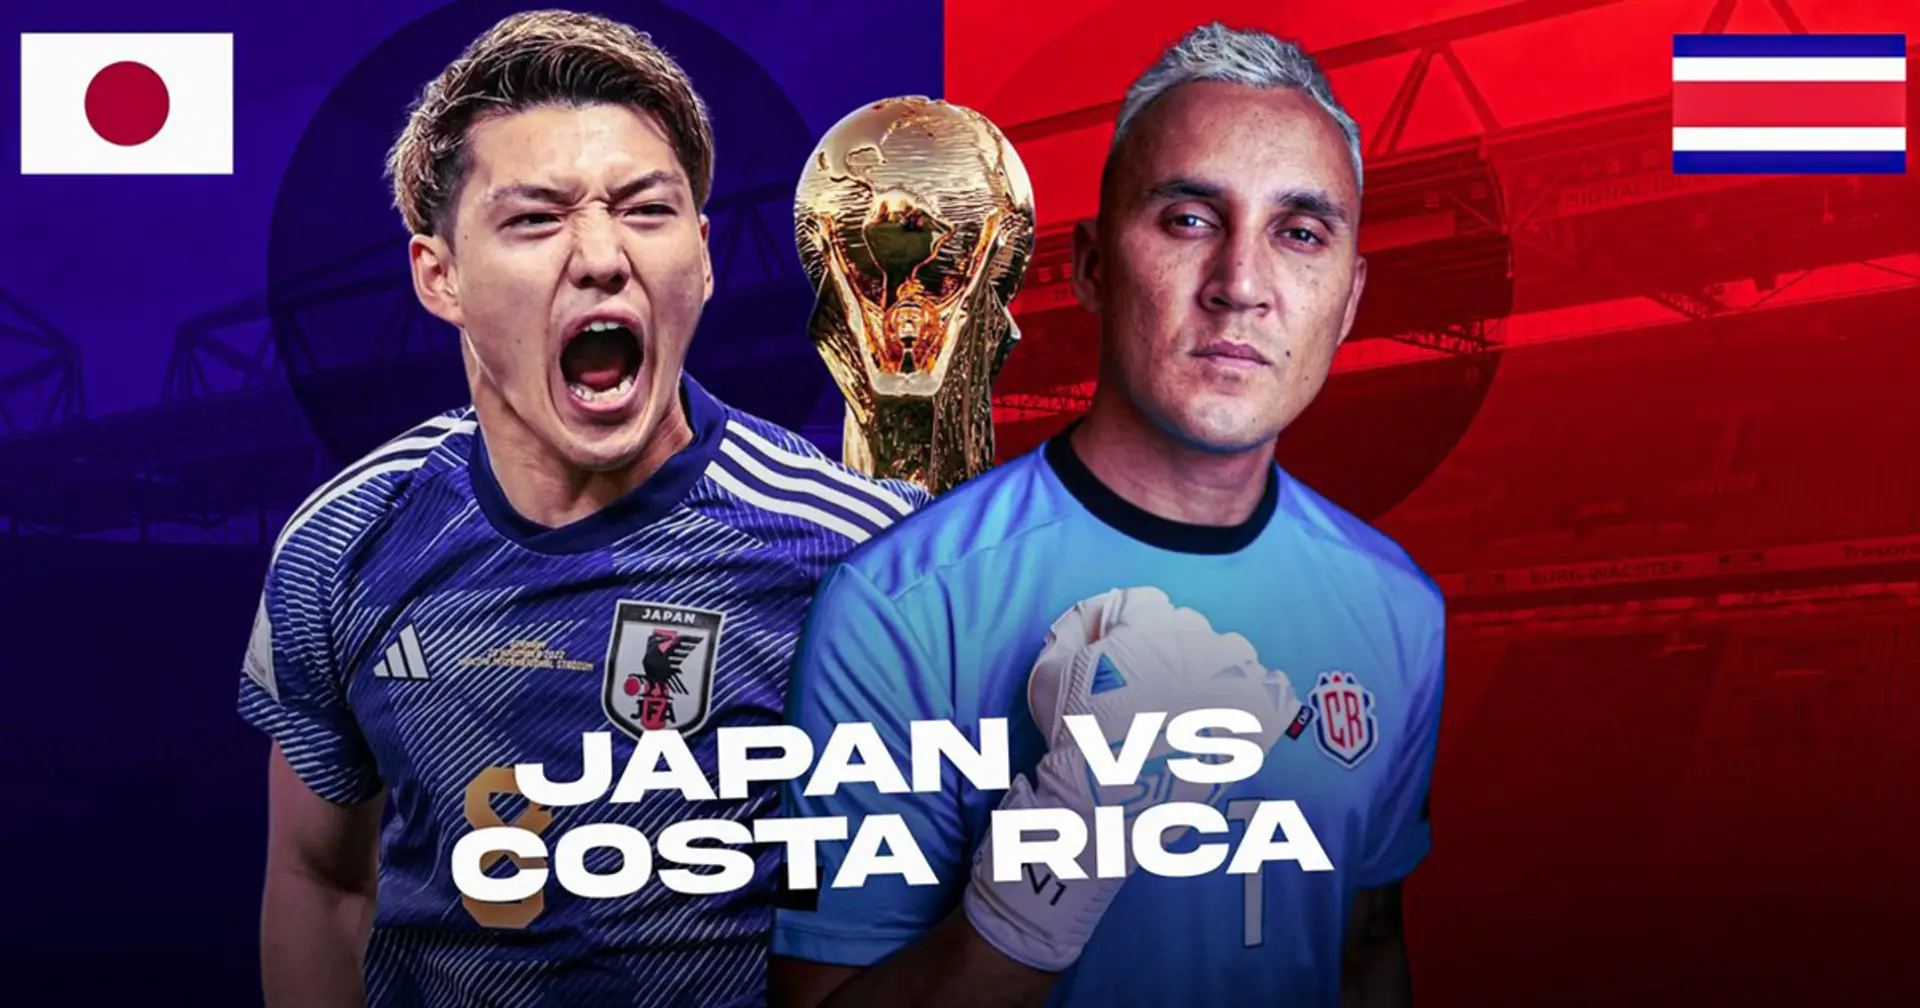 Japan v Costa Rica: Official team lineups for the World Cup clash revealed